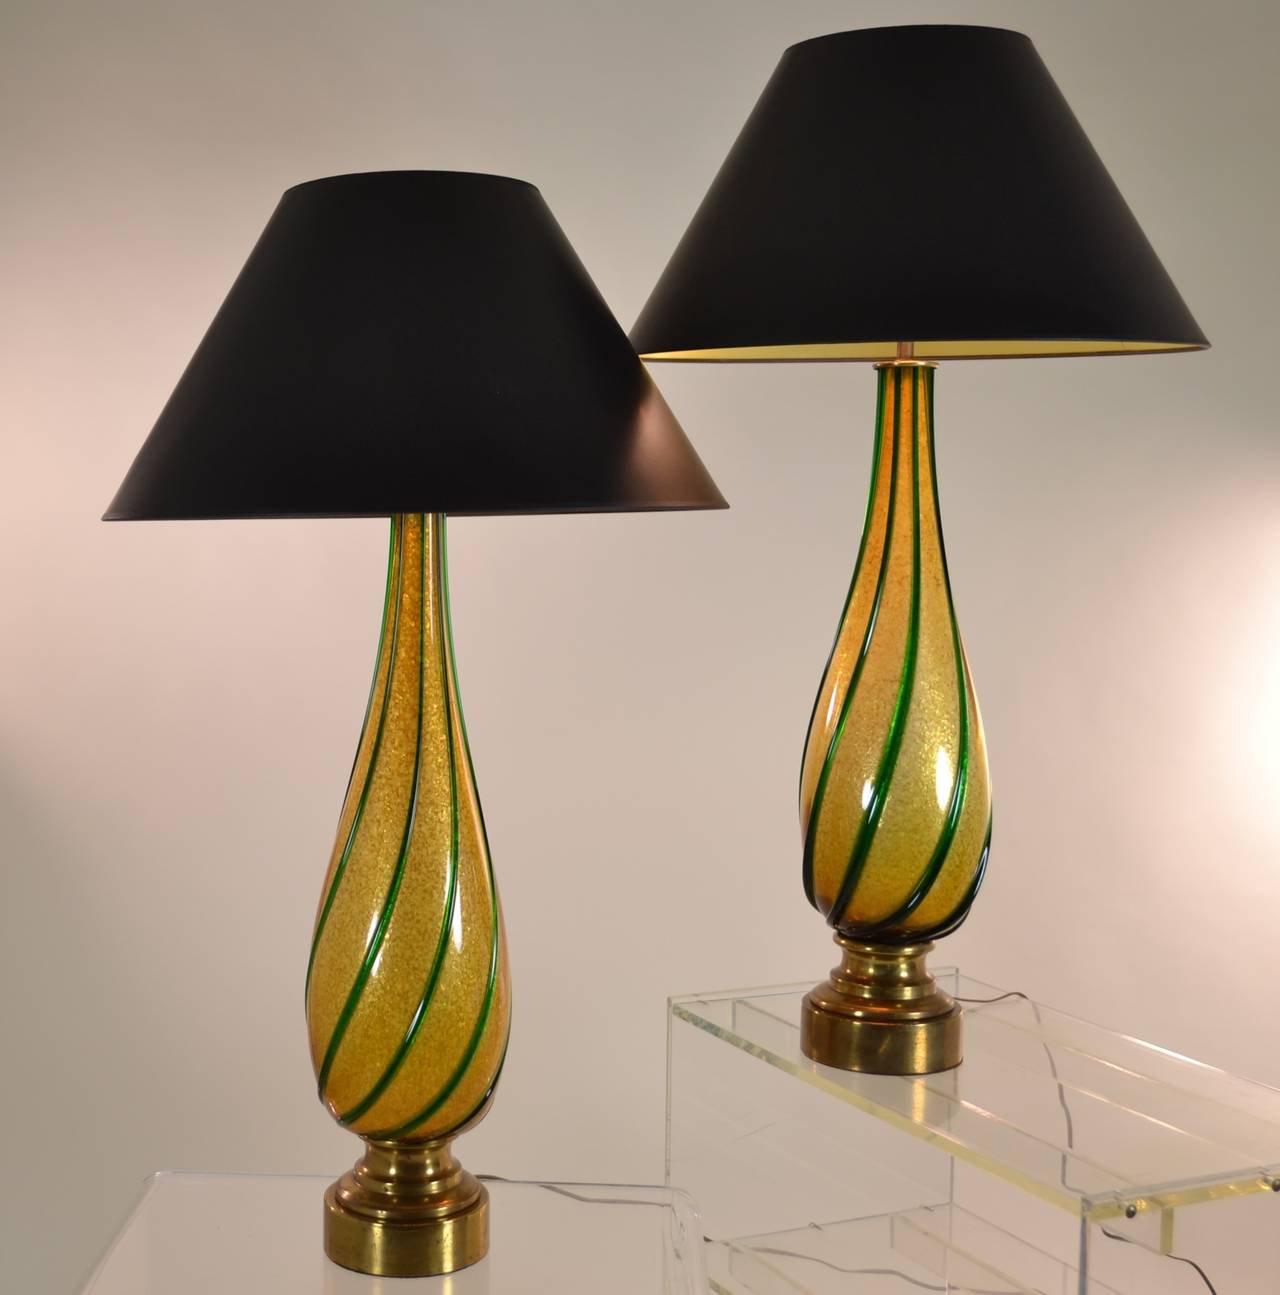 Heavy gold flakes in the glass give the lamps a beautiful warm glow accented with applied green glass piping. A nice vintage pair with new wiring and shades, Italy, circa 1950s. Dimensions: Height to top of finial is 38